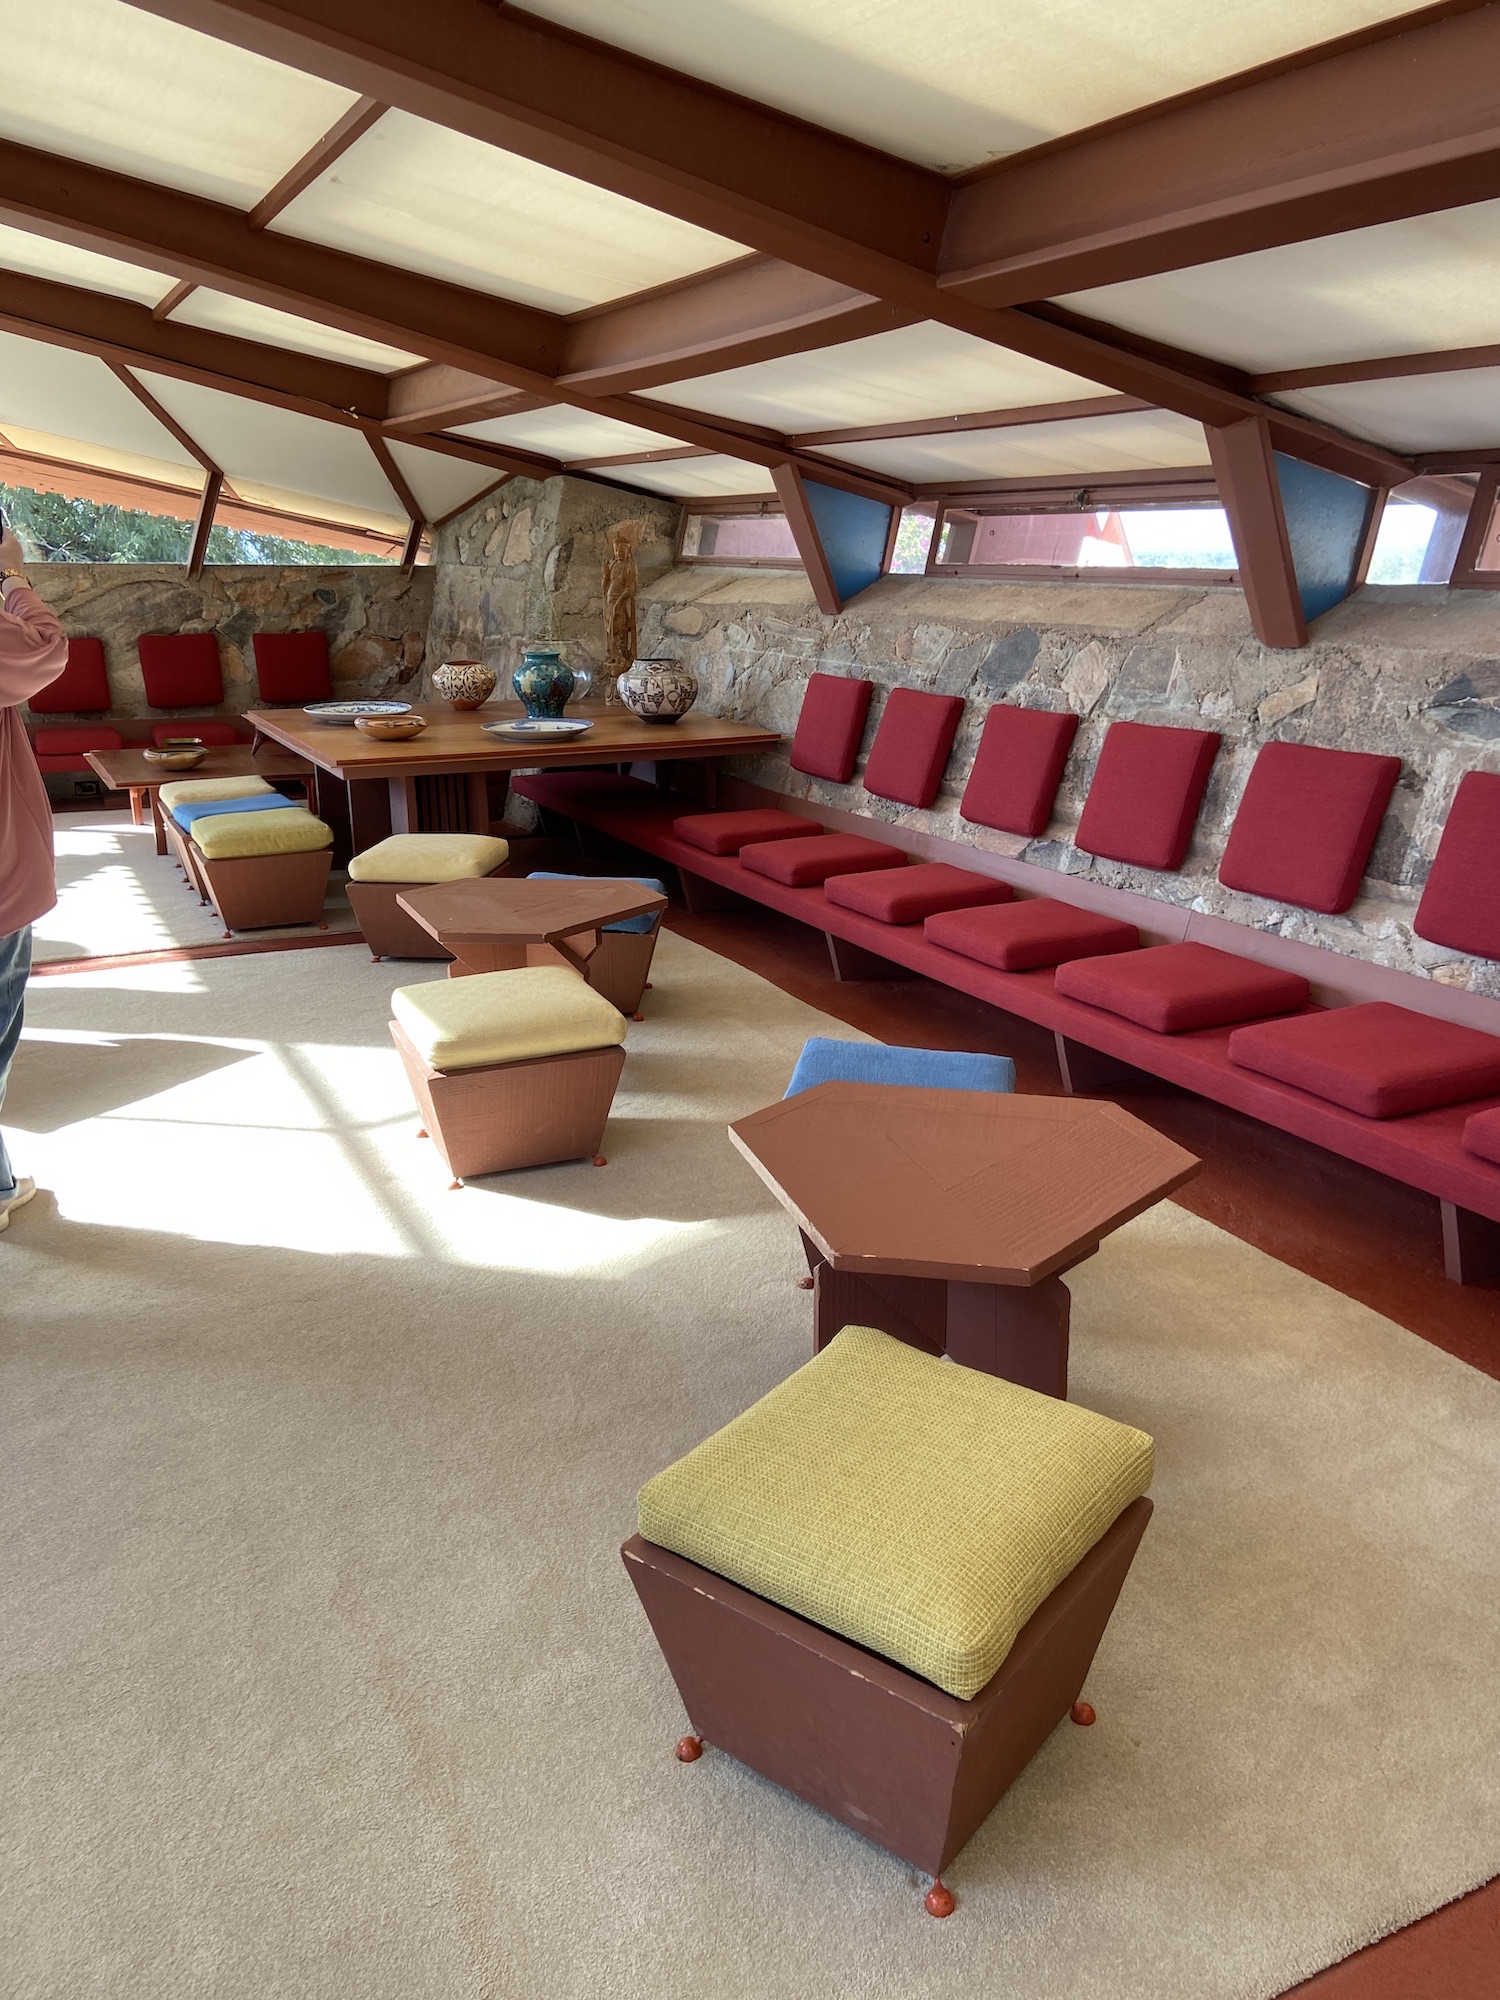 A living space at Frank Lloyd Wright's Taliesin West.